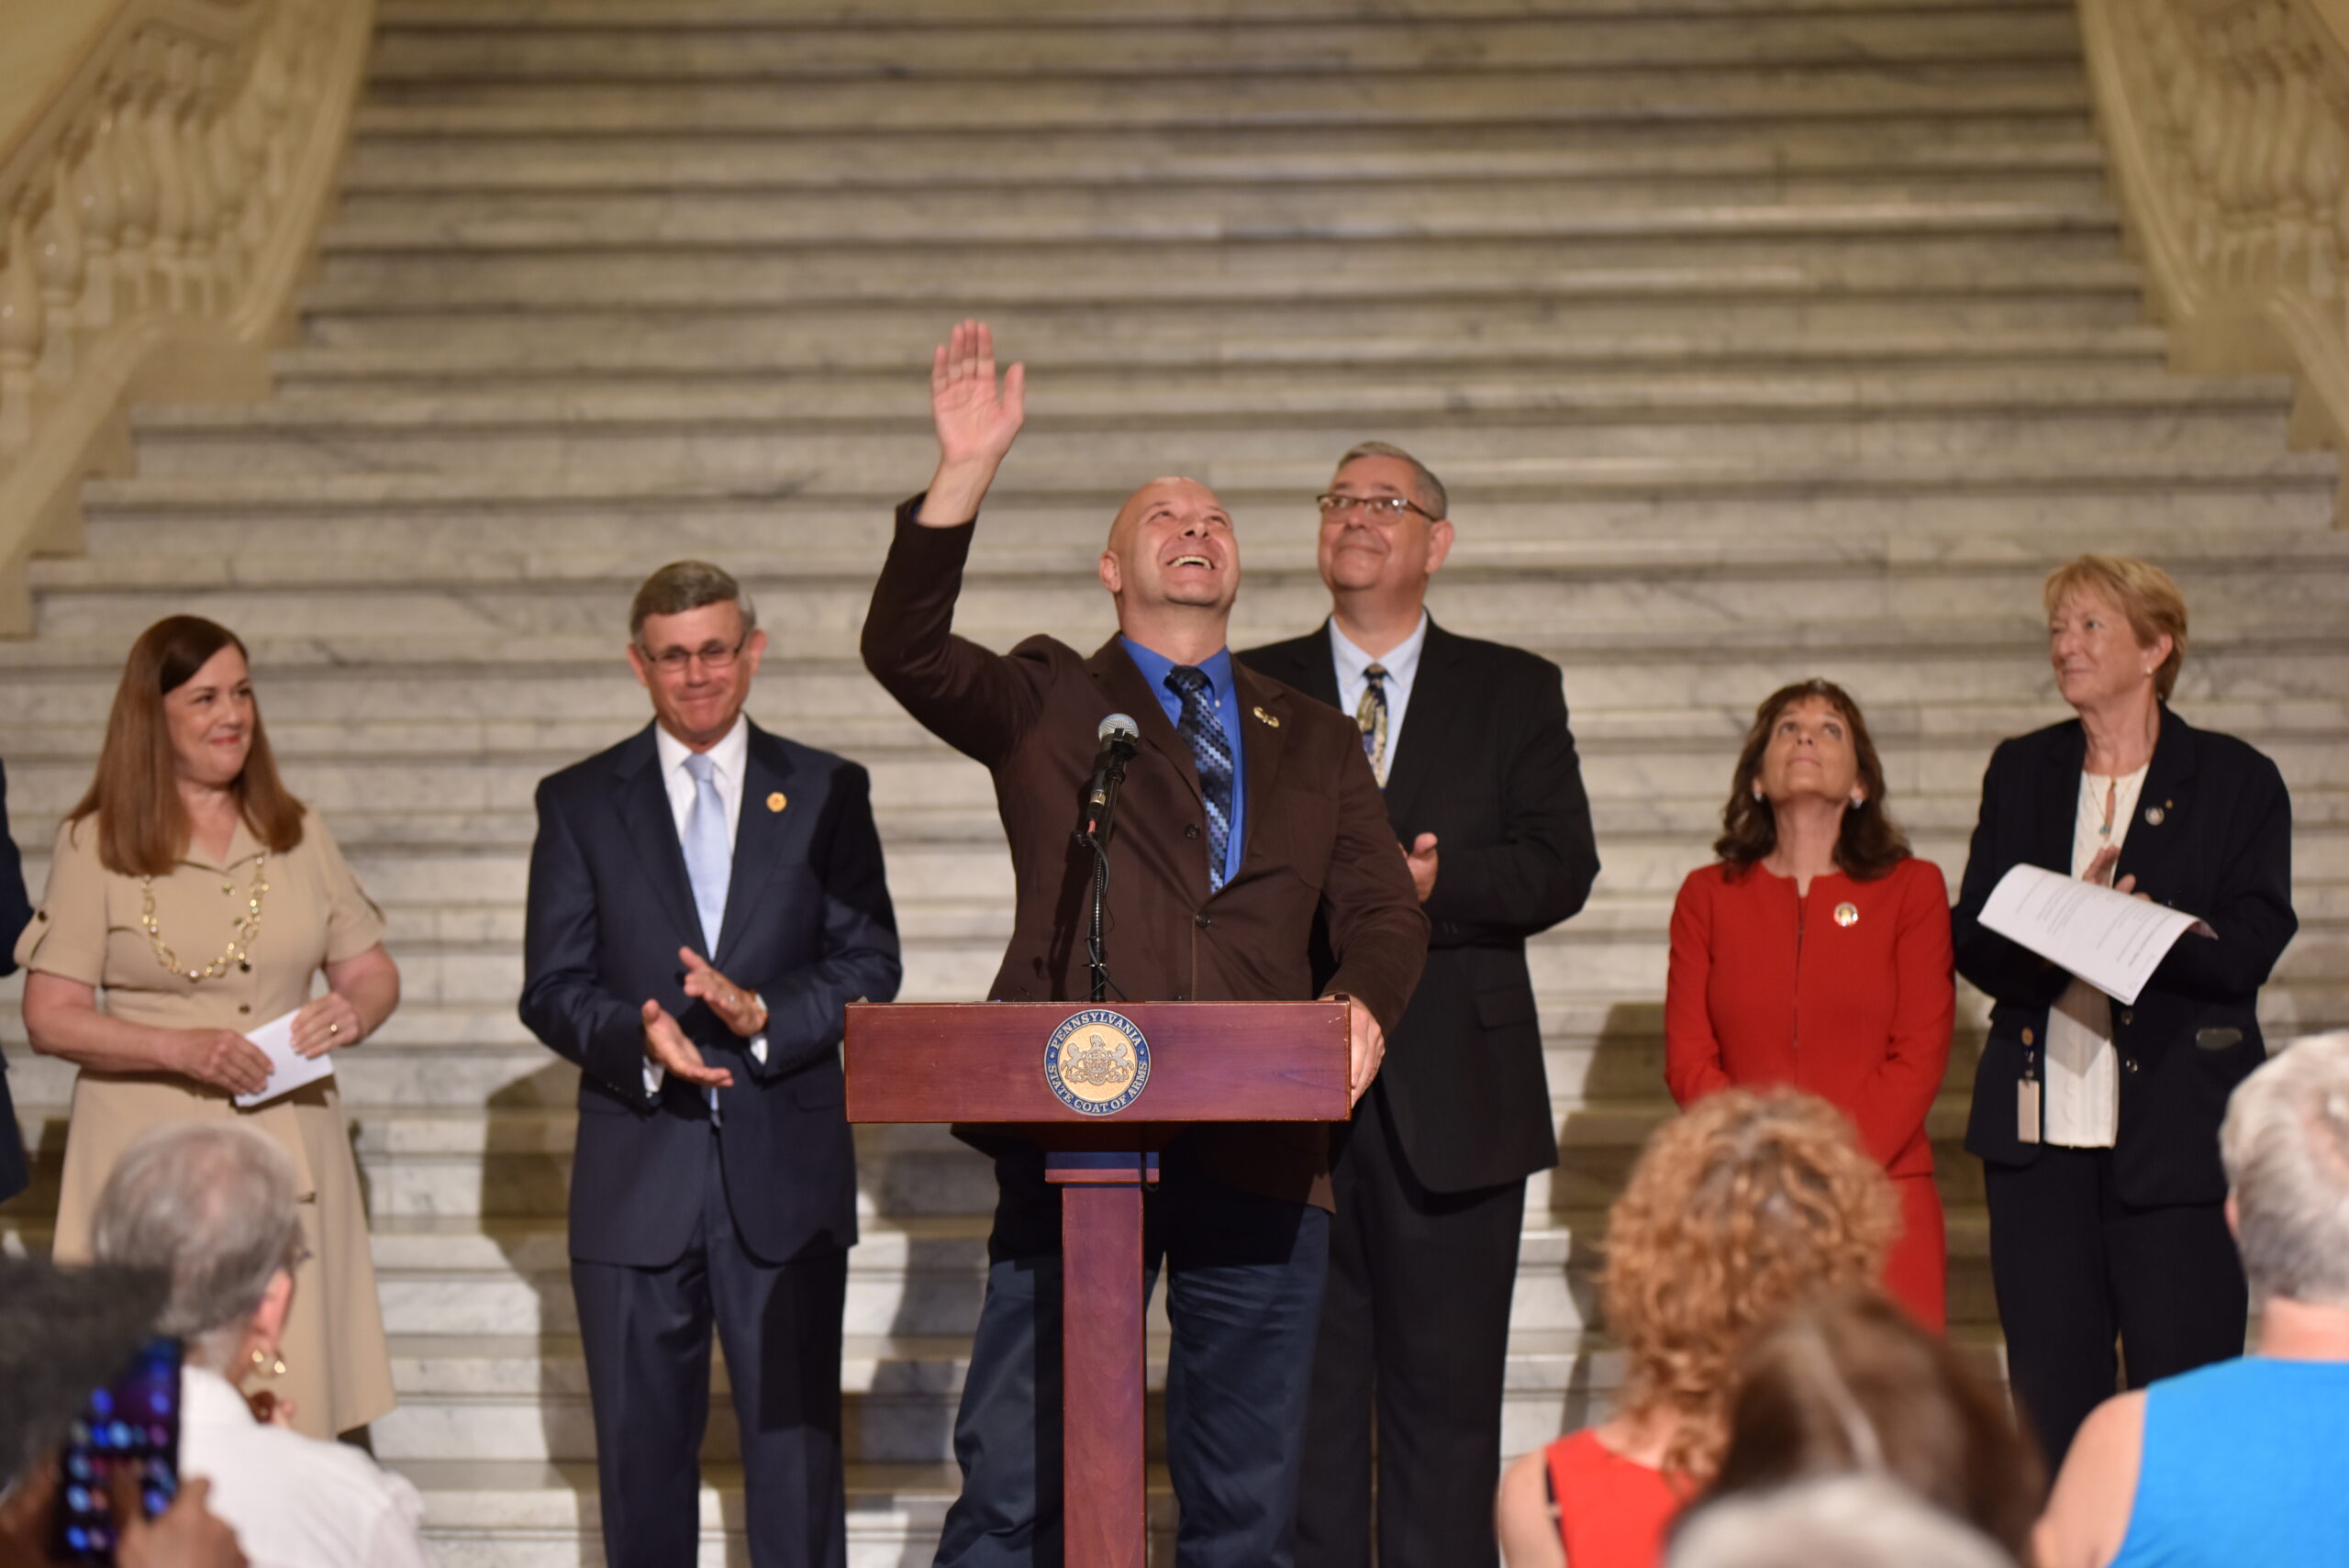 State Sen. Doug Mastriano (R-Franklin), the 2022 Republican candidate for governor, waves to members of a crowd gathered for a rally celebrating William Penn in the state Capitol rotunda in Harrisburg on July 1, 2022. 